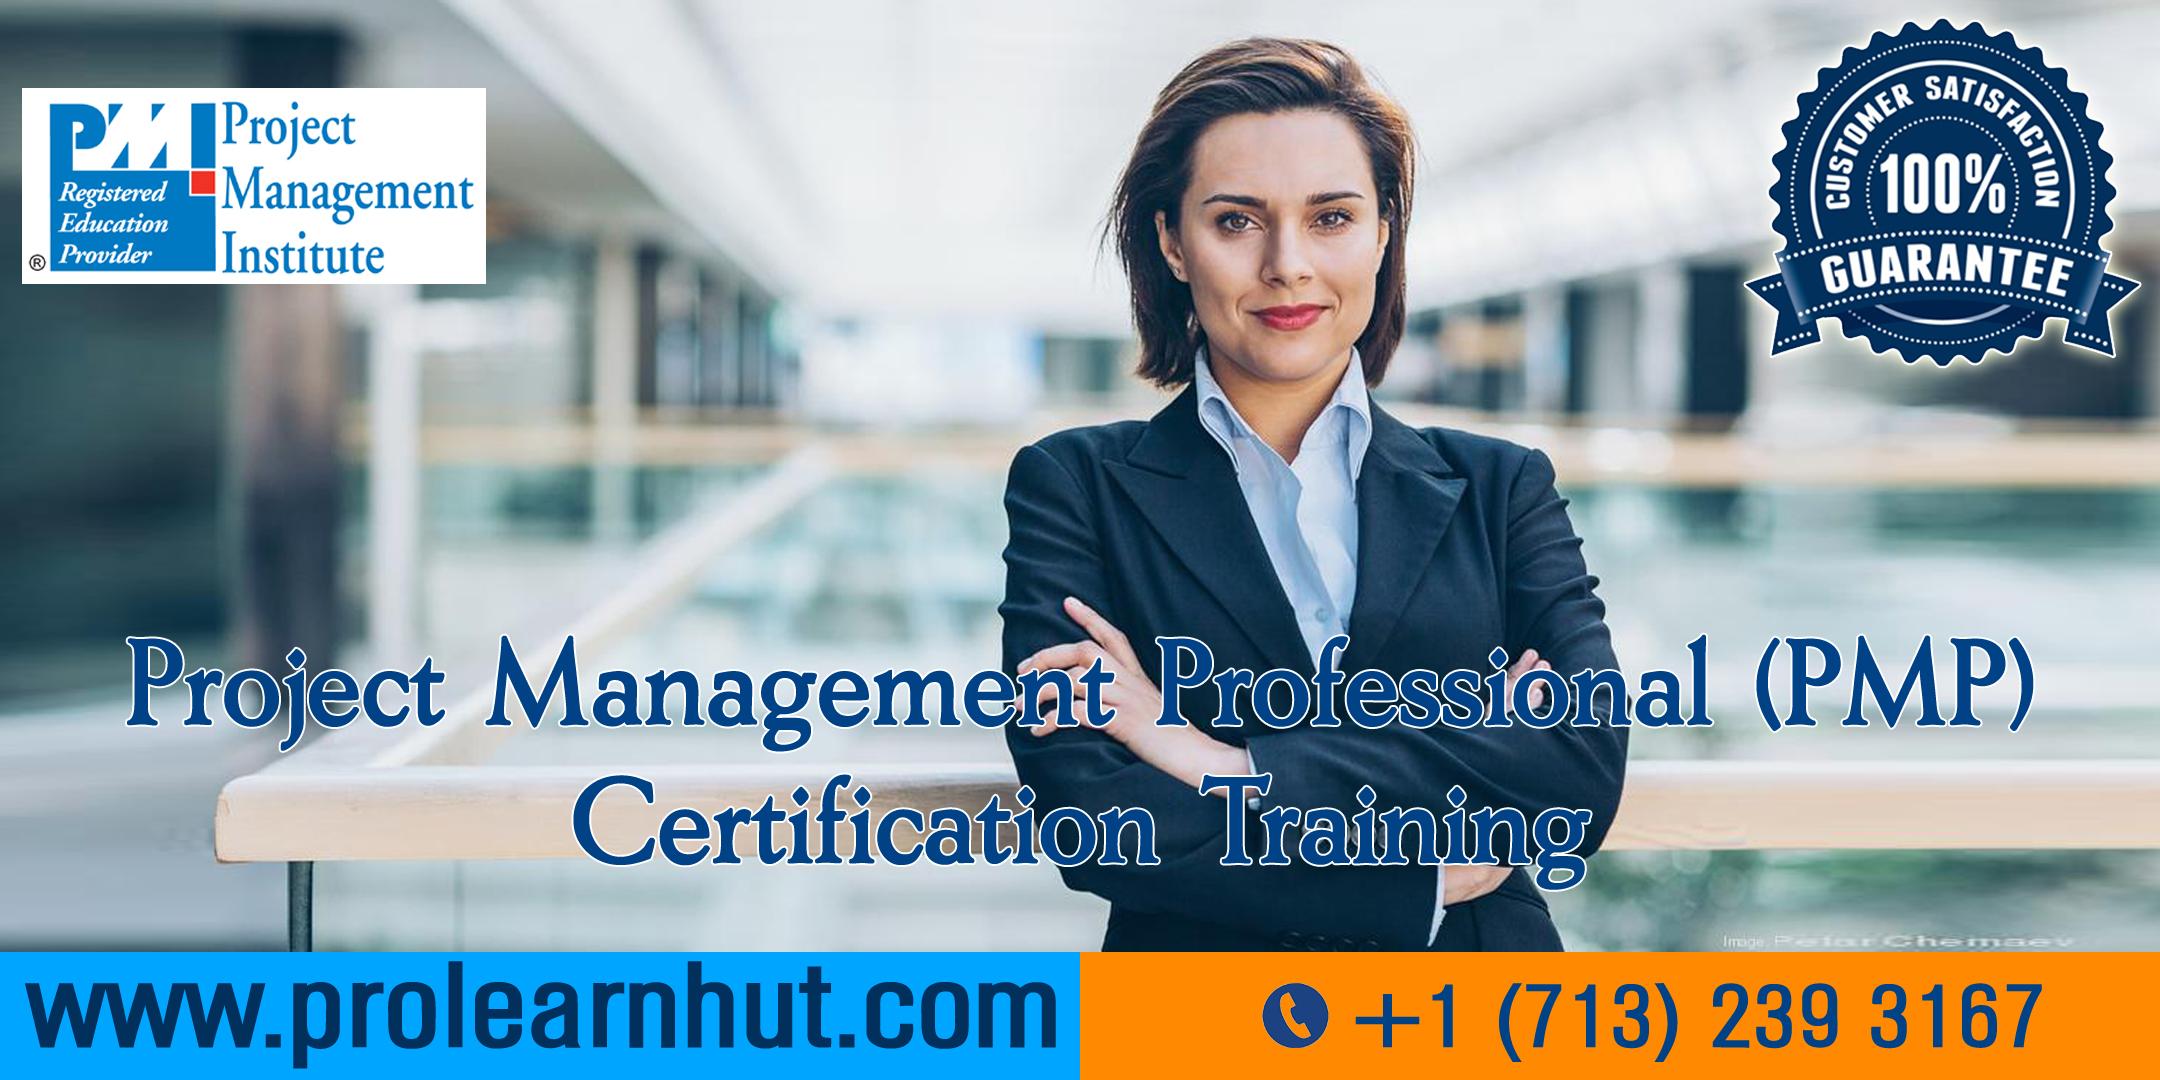 PMP Certification | Project Management Certification| PMP Training in Berkeley, CA | ProLearnHut